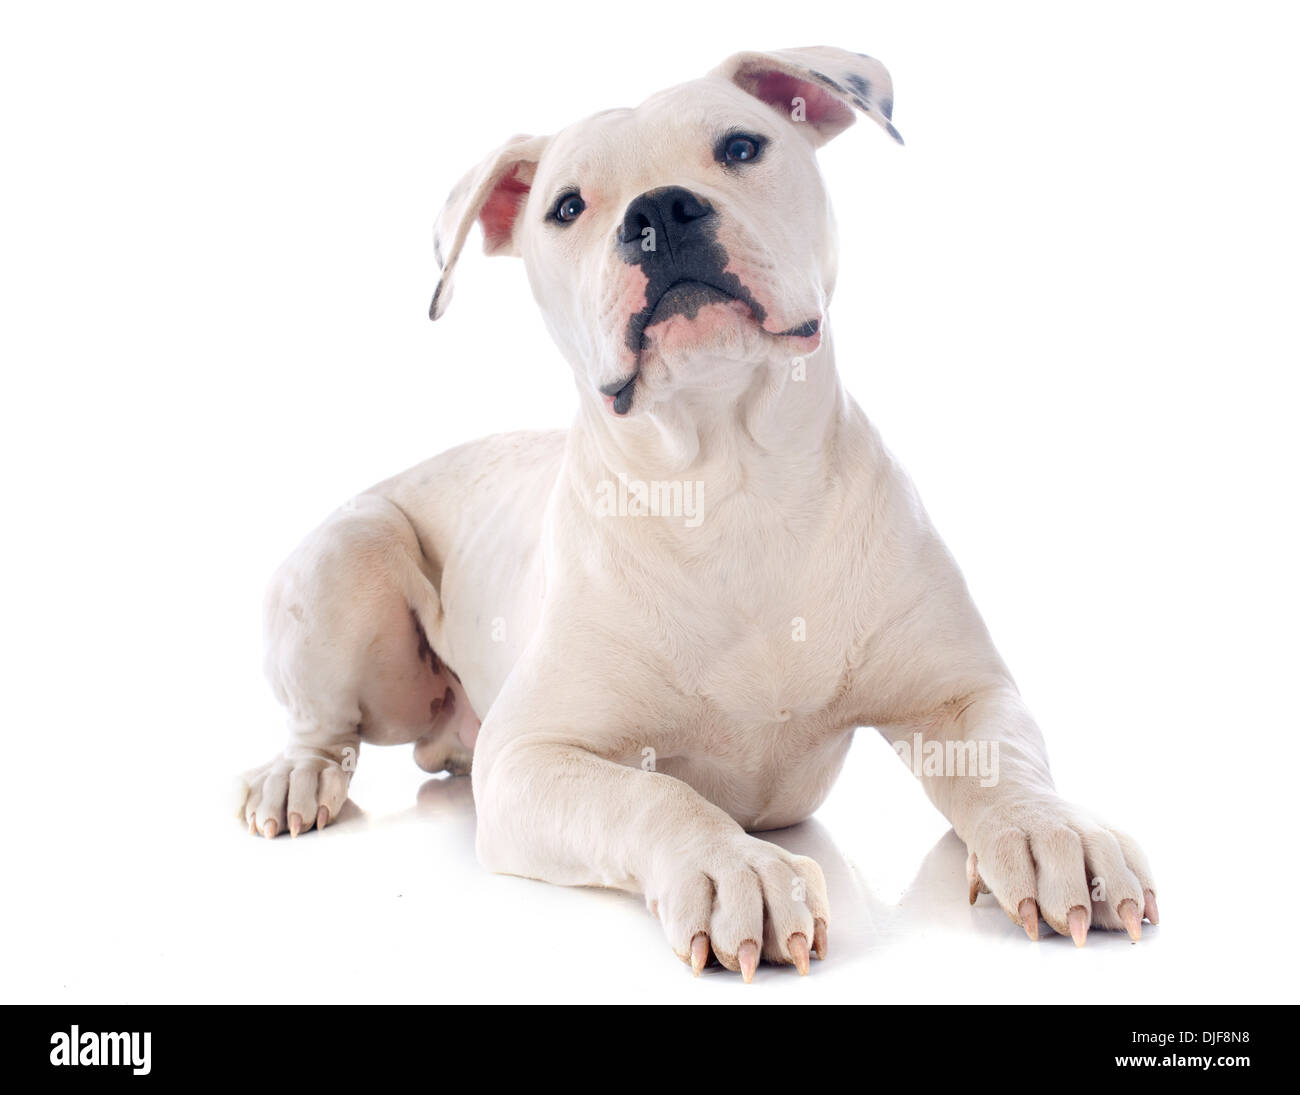 american bulldog in front of white background Stock Photo - Alamy